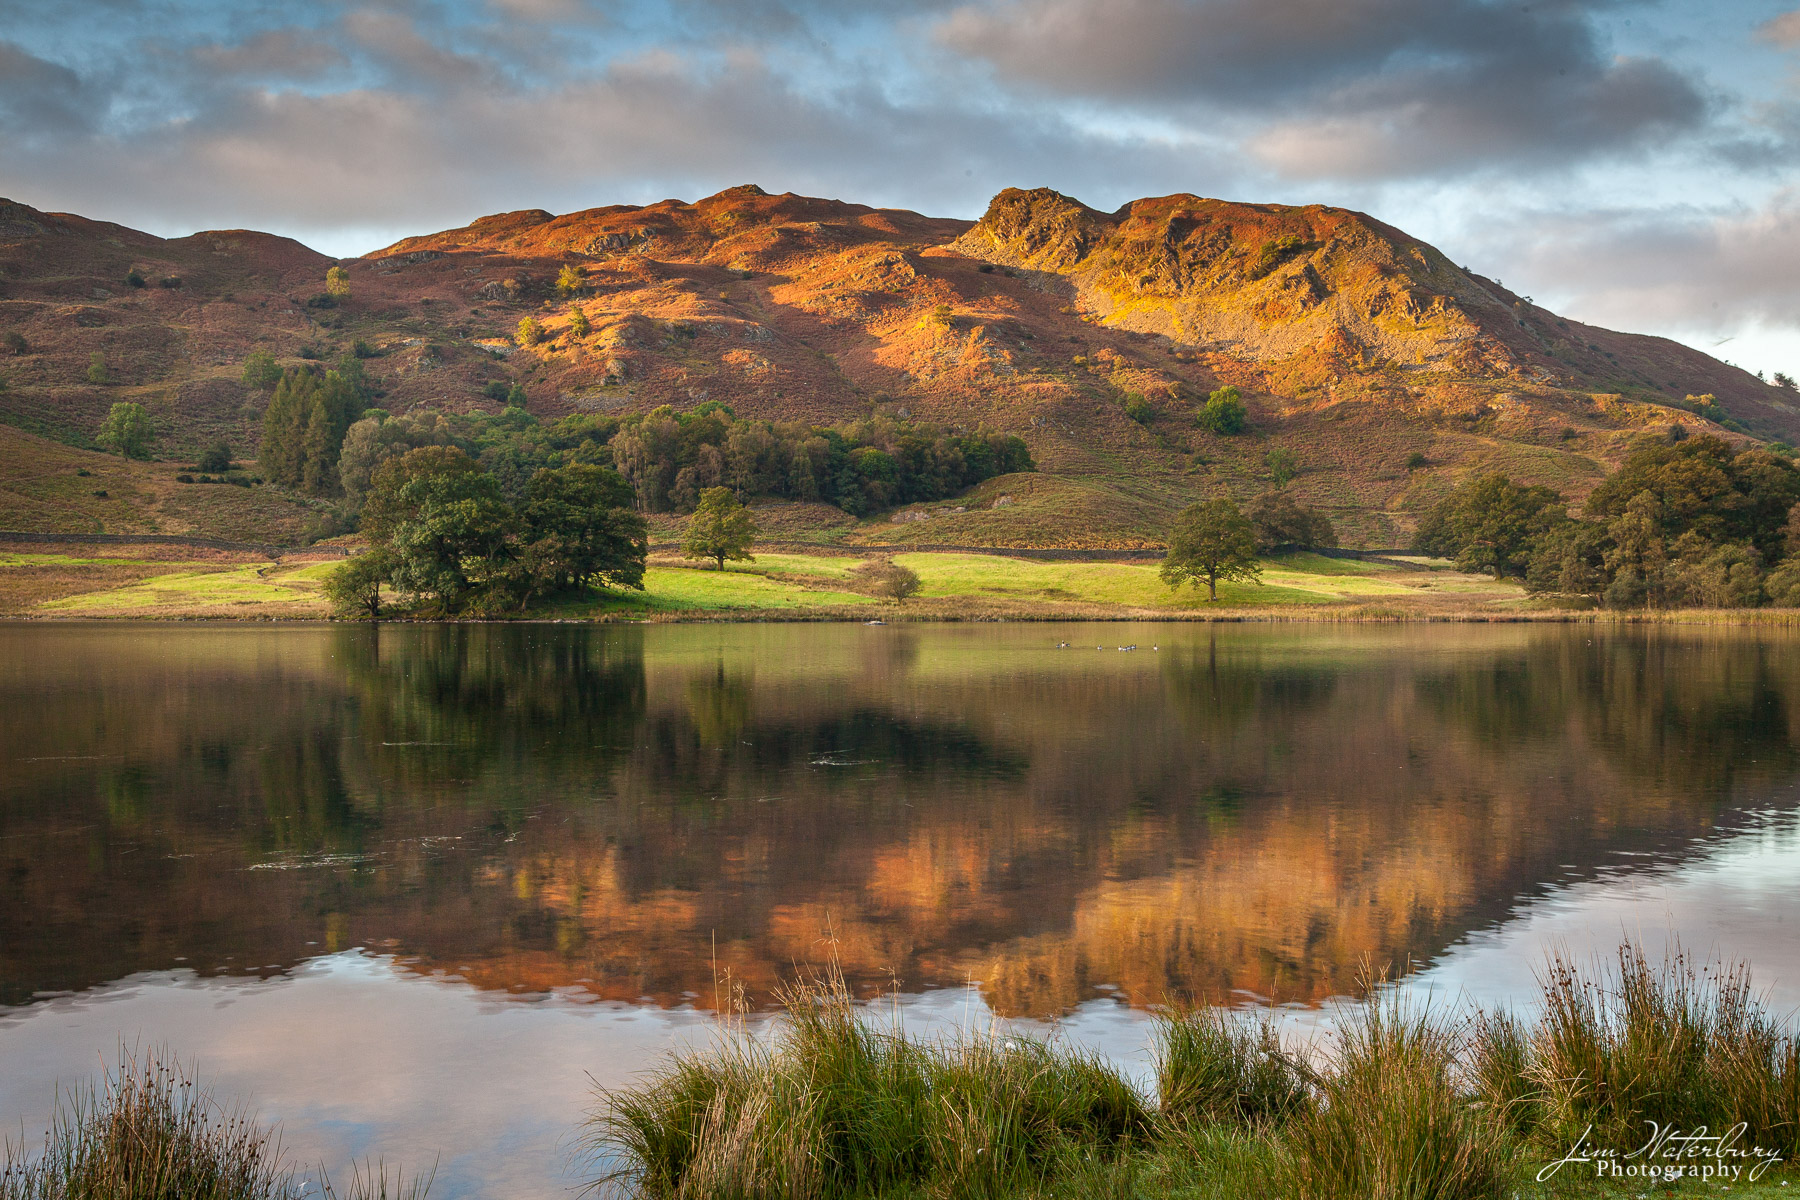 Sunrise over Rydal Water, off A591 between Rydal and Grasmere, Lake District, Cumbria, UK